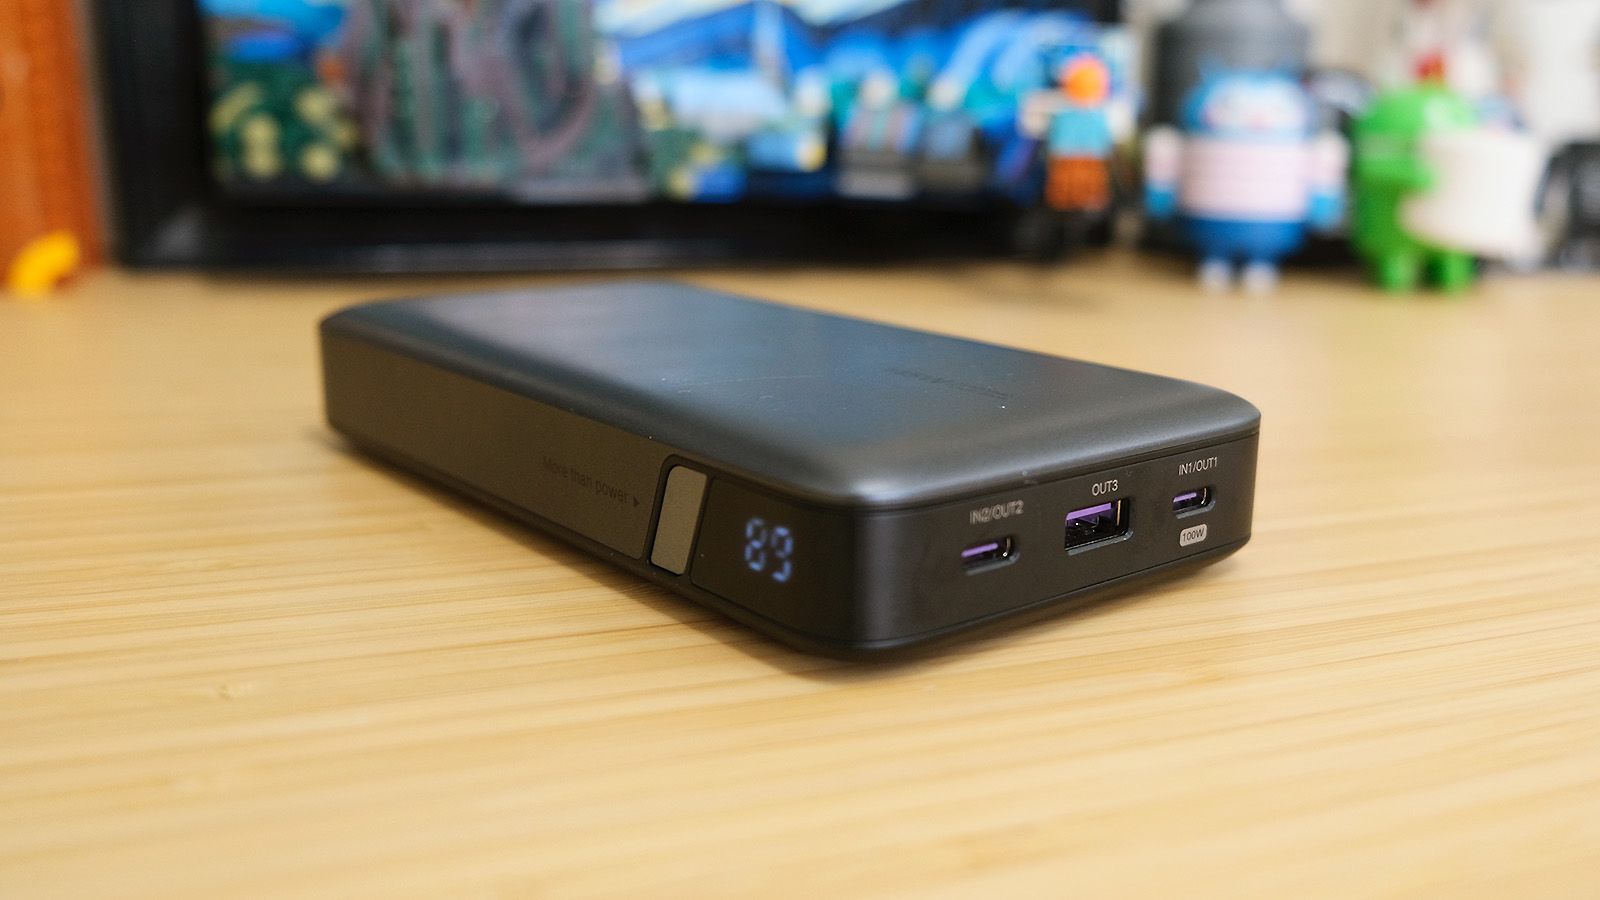 Give your charger a power bank upgrade with this handy hybrid